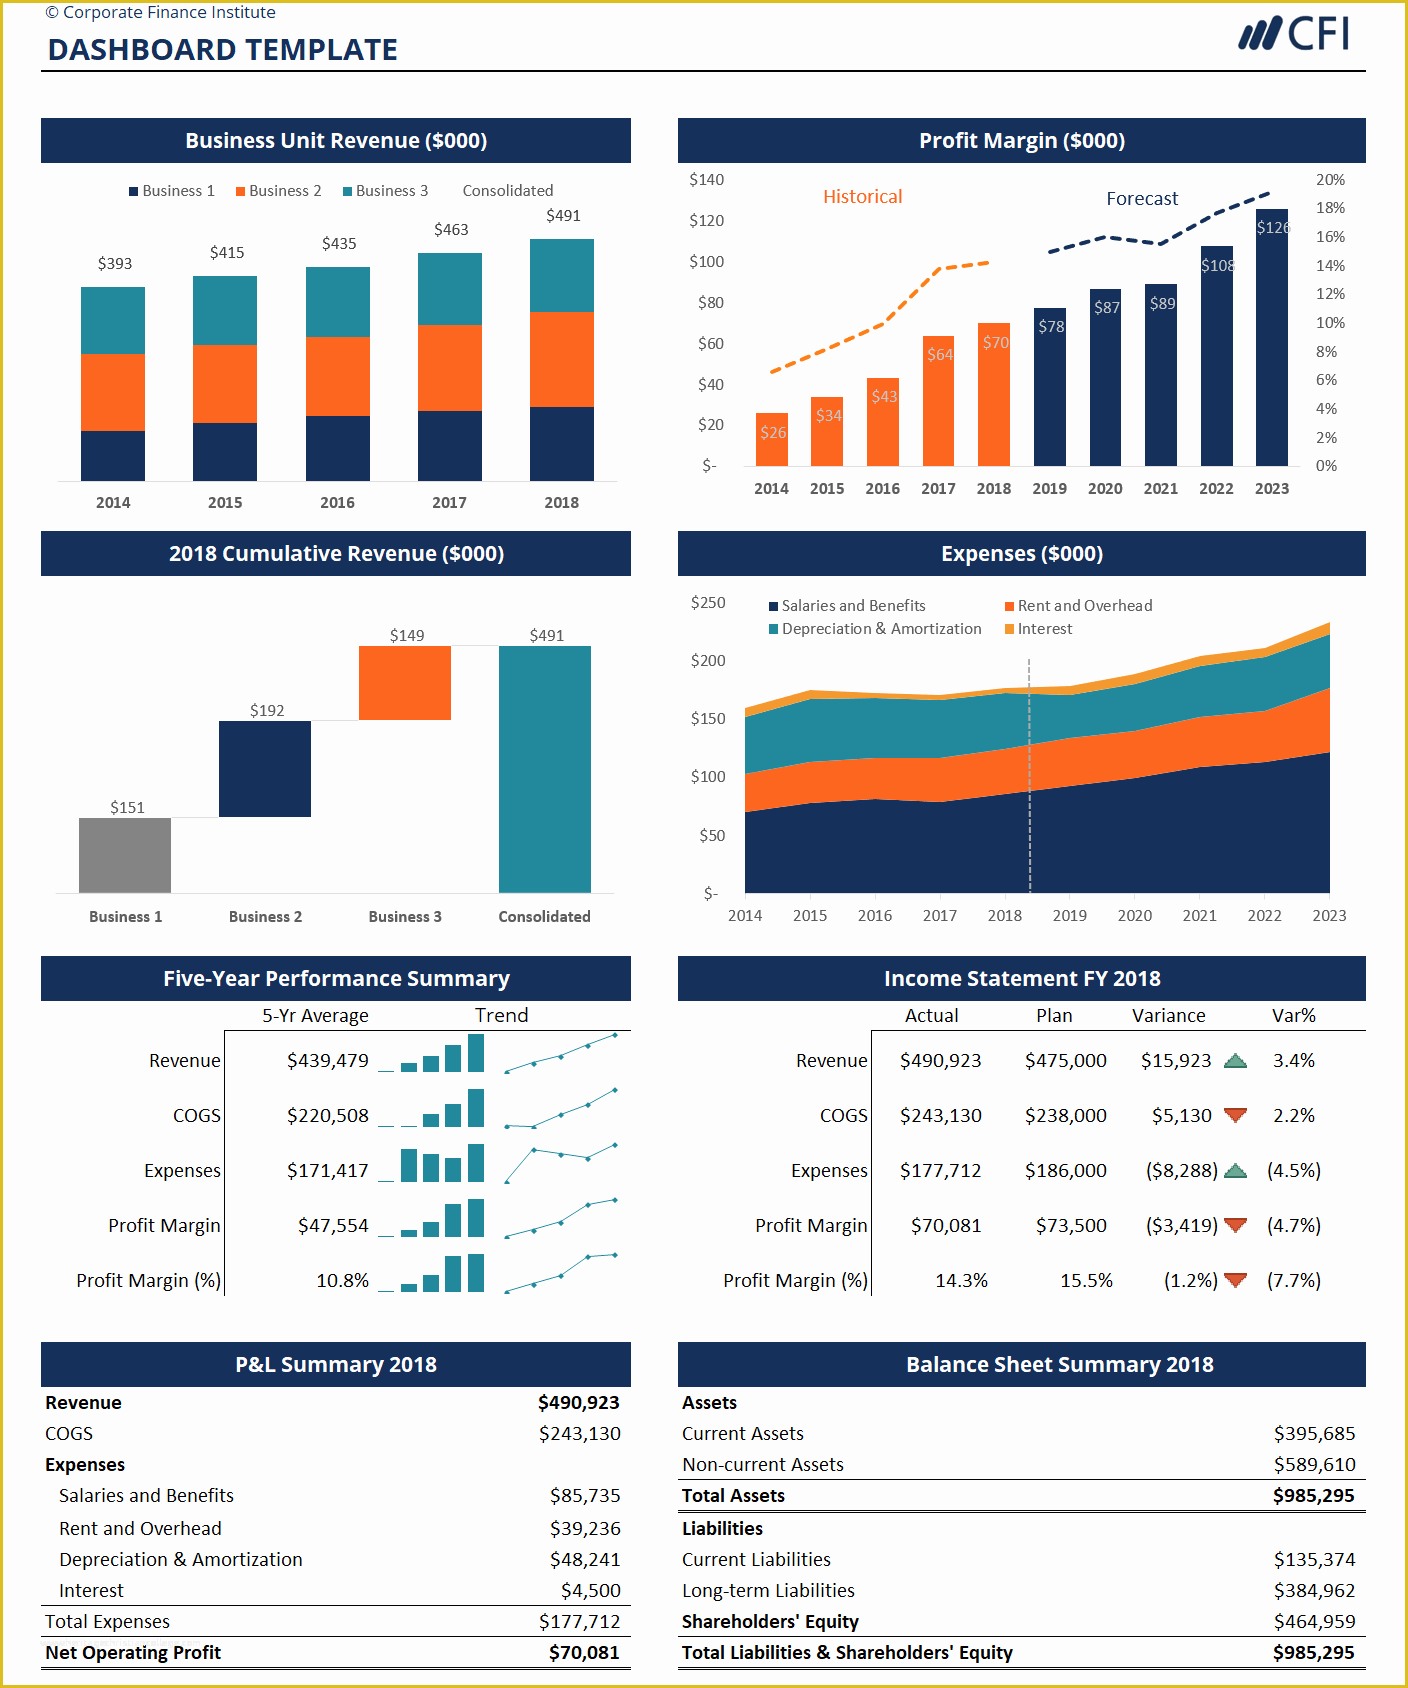 Free Excel Financial Dashboard Templates Of Financial Modeling Dashboard Corporate Finance Institute